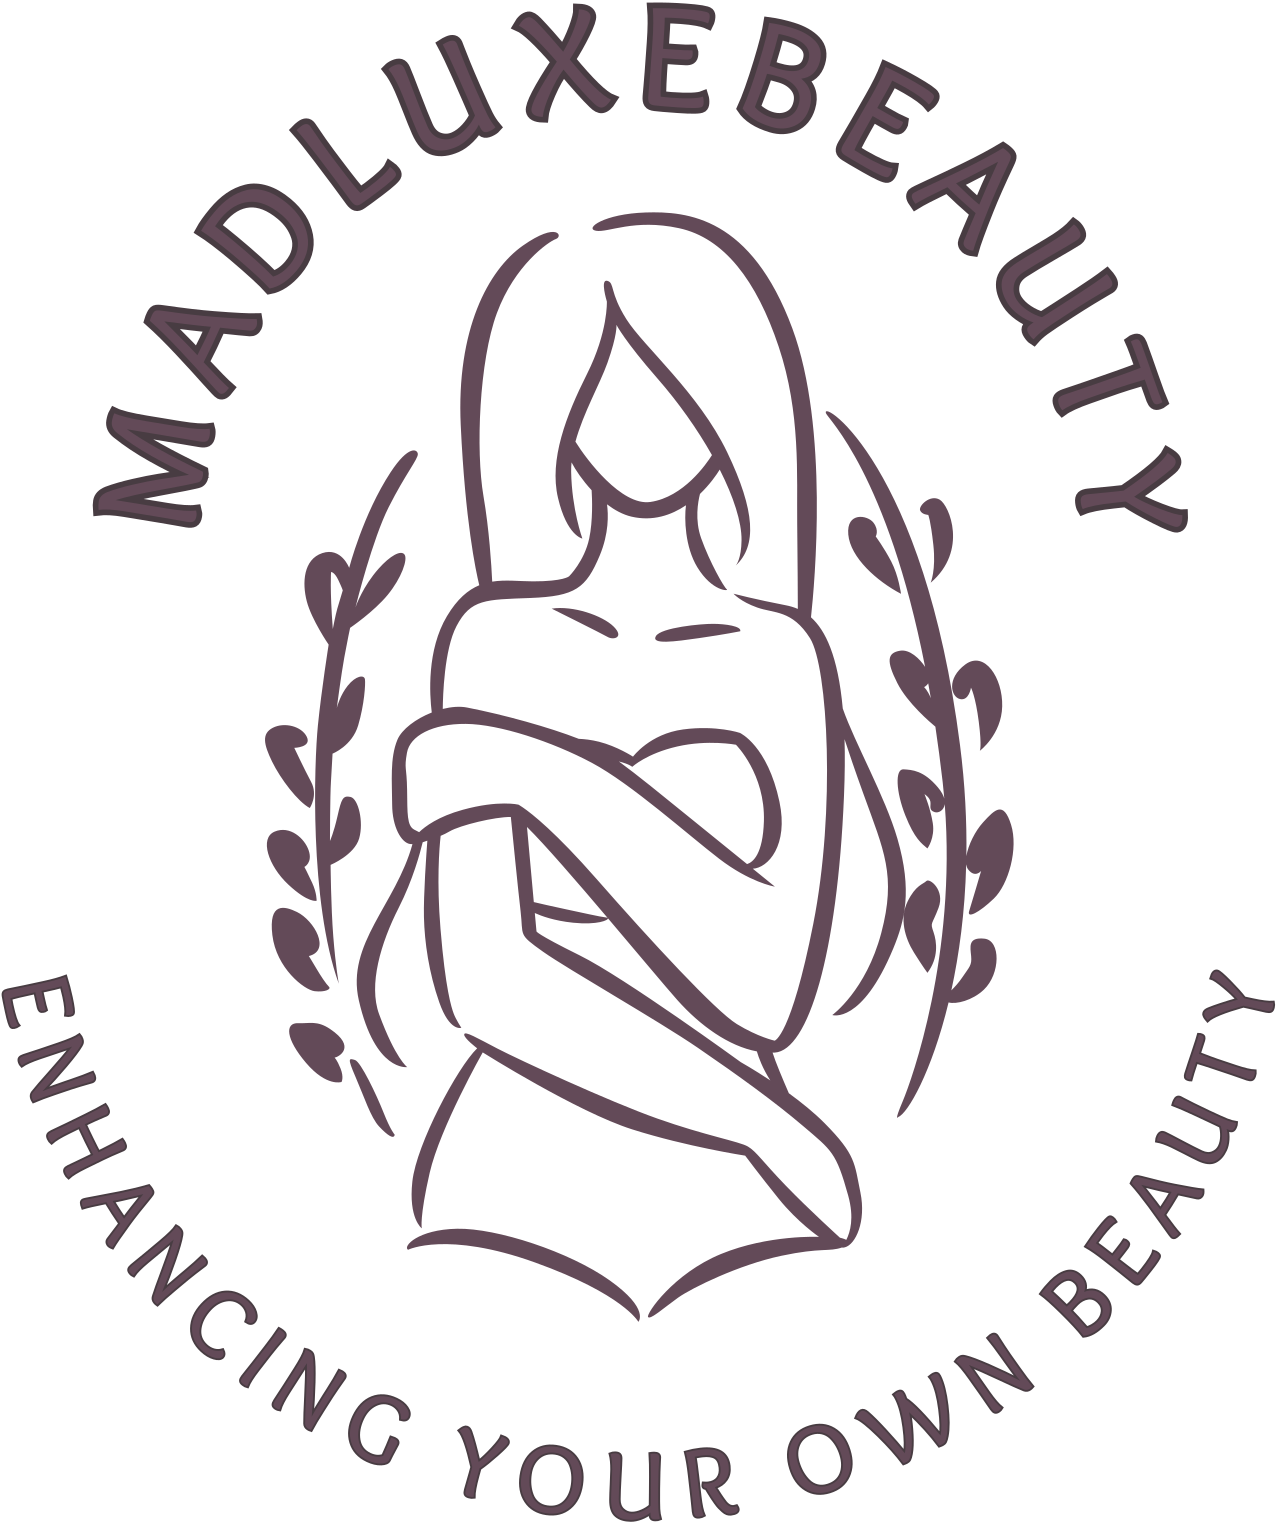 MADLUXEBEAUTY's web page